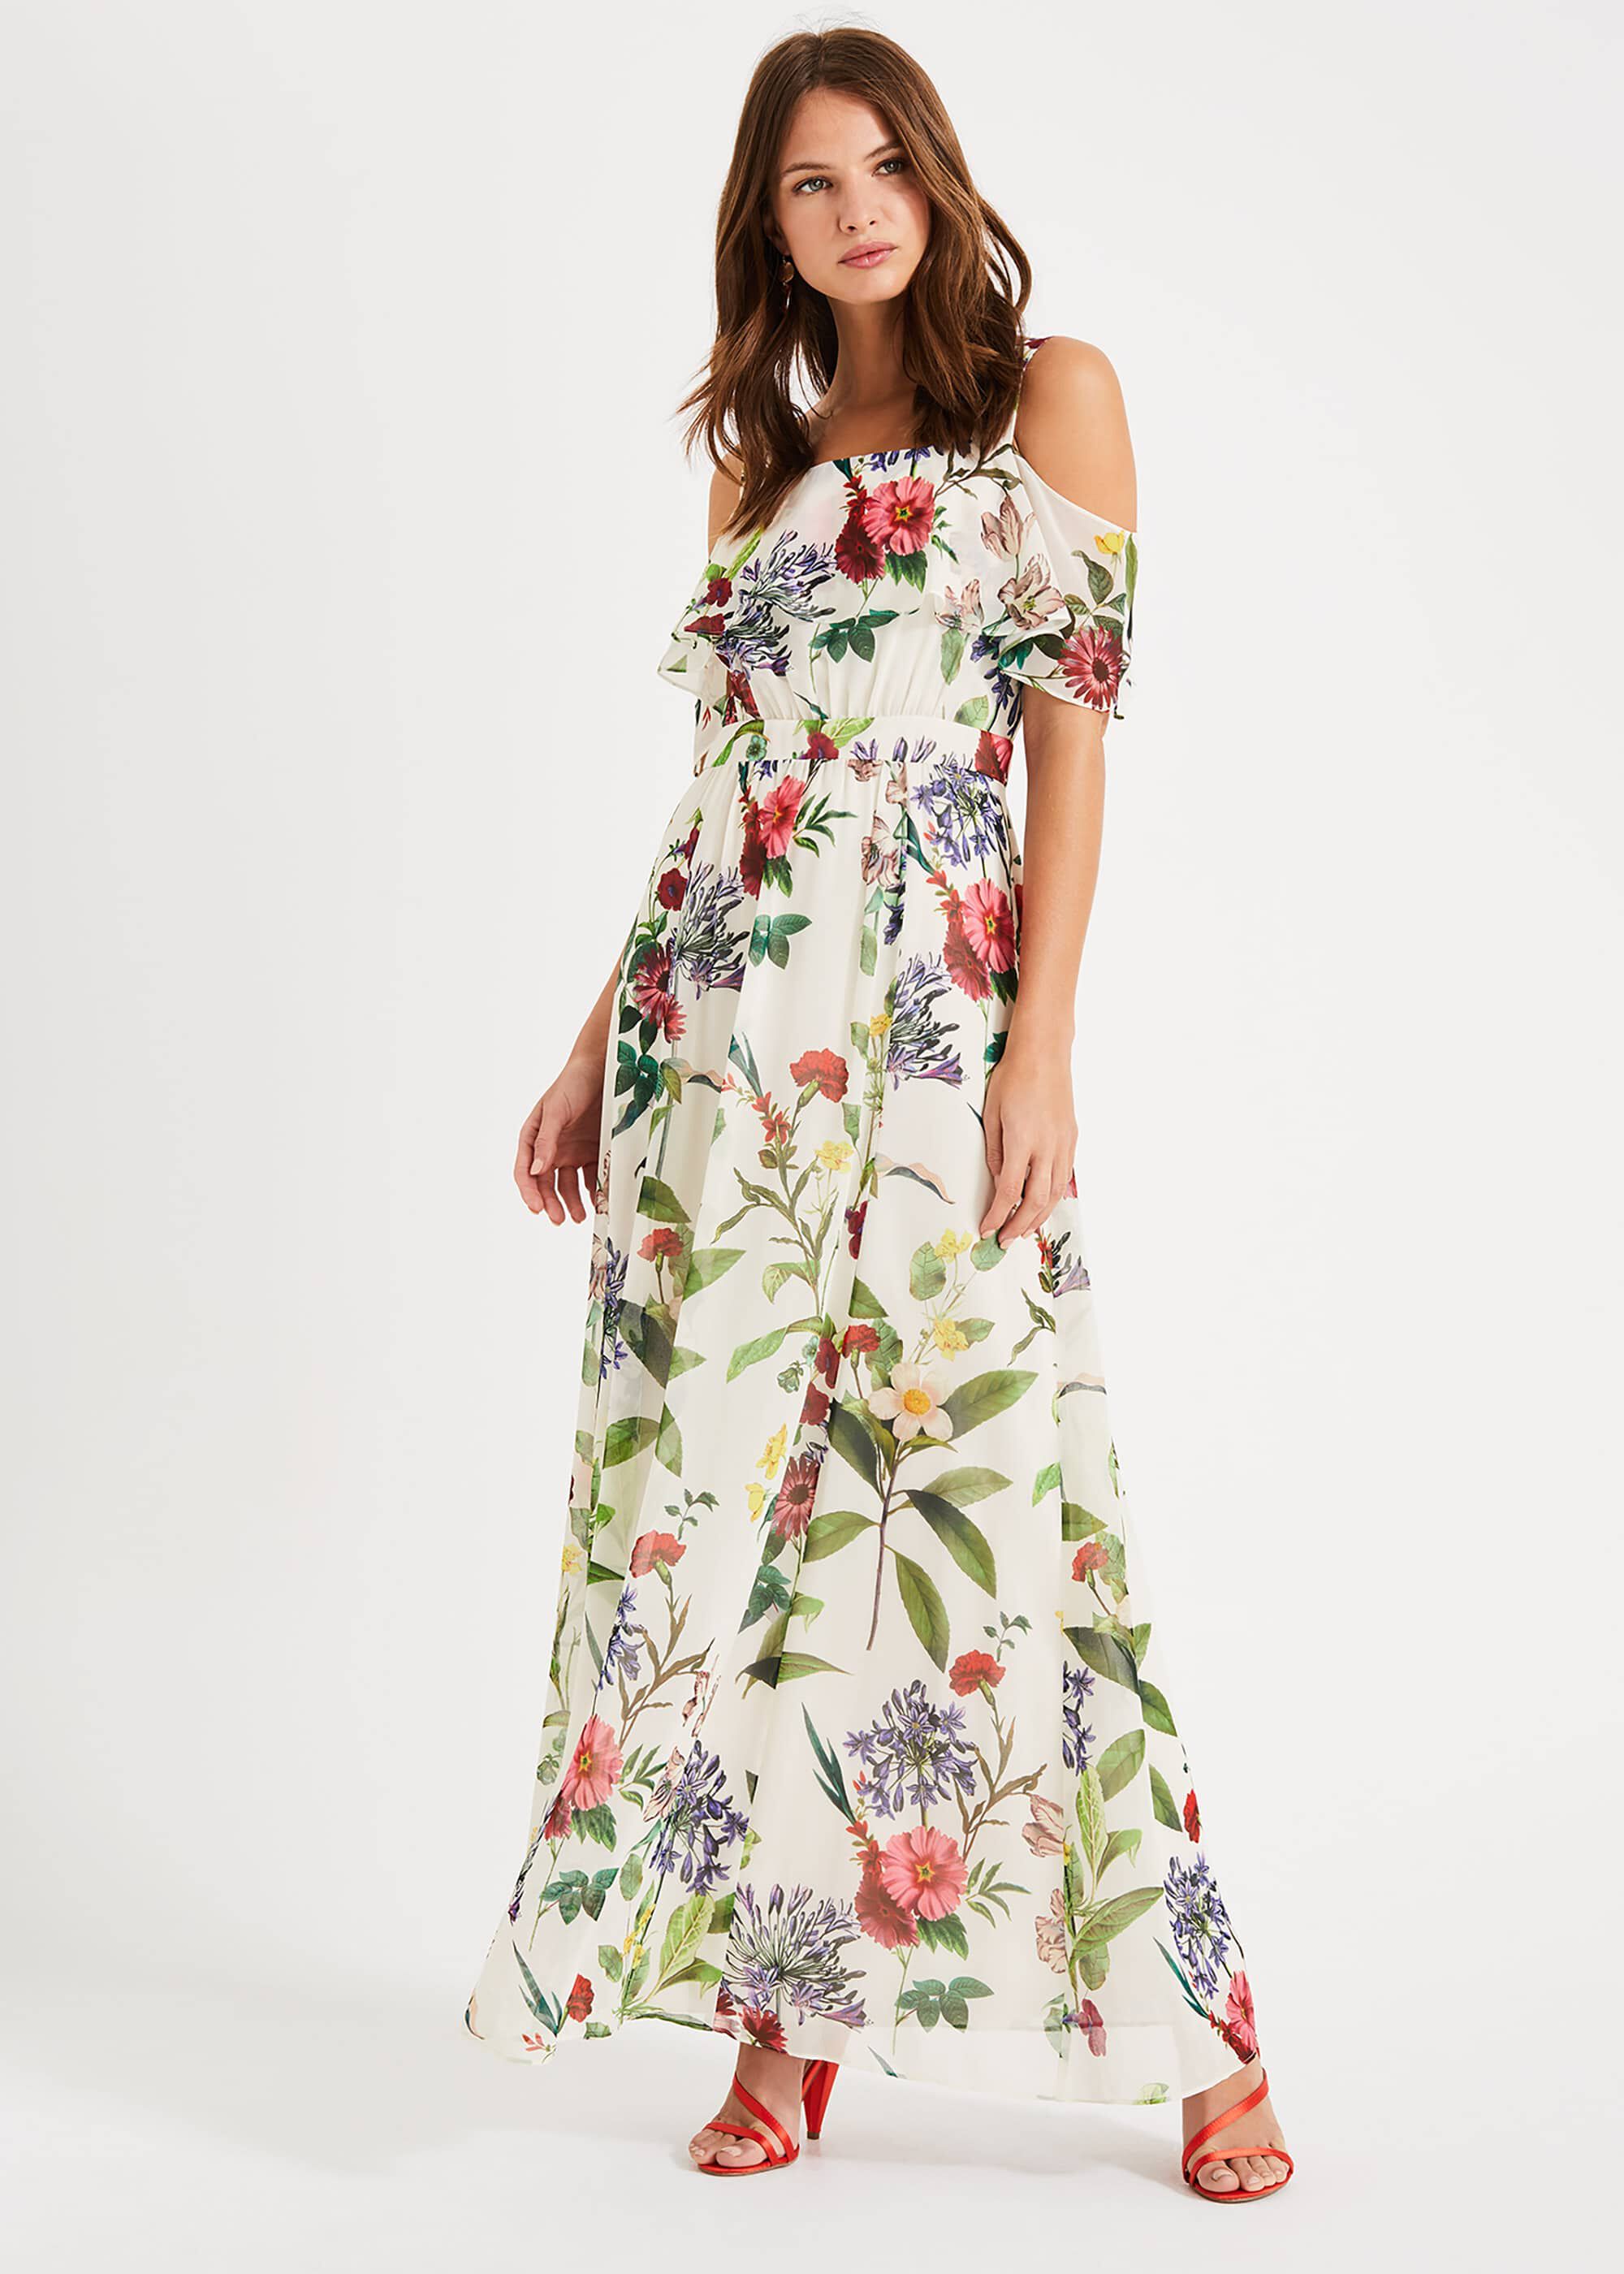 Nell Floral Maxi Dress | Phase Eight